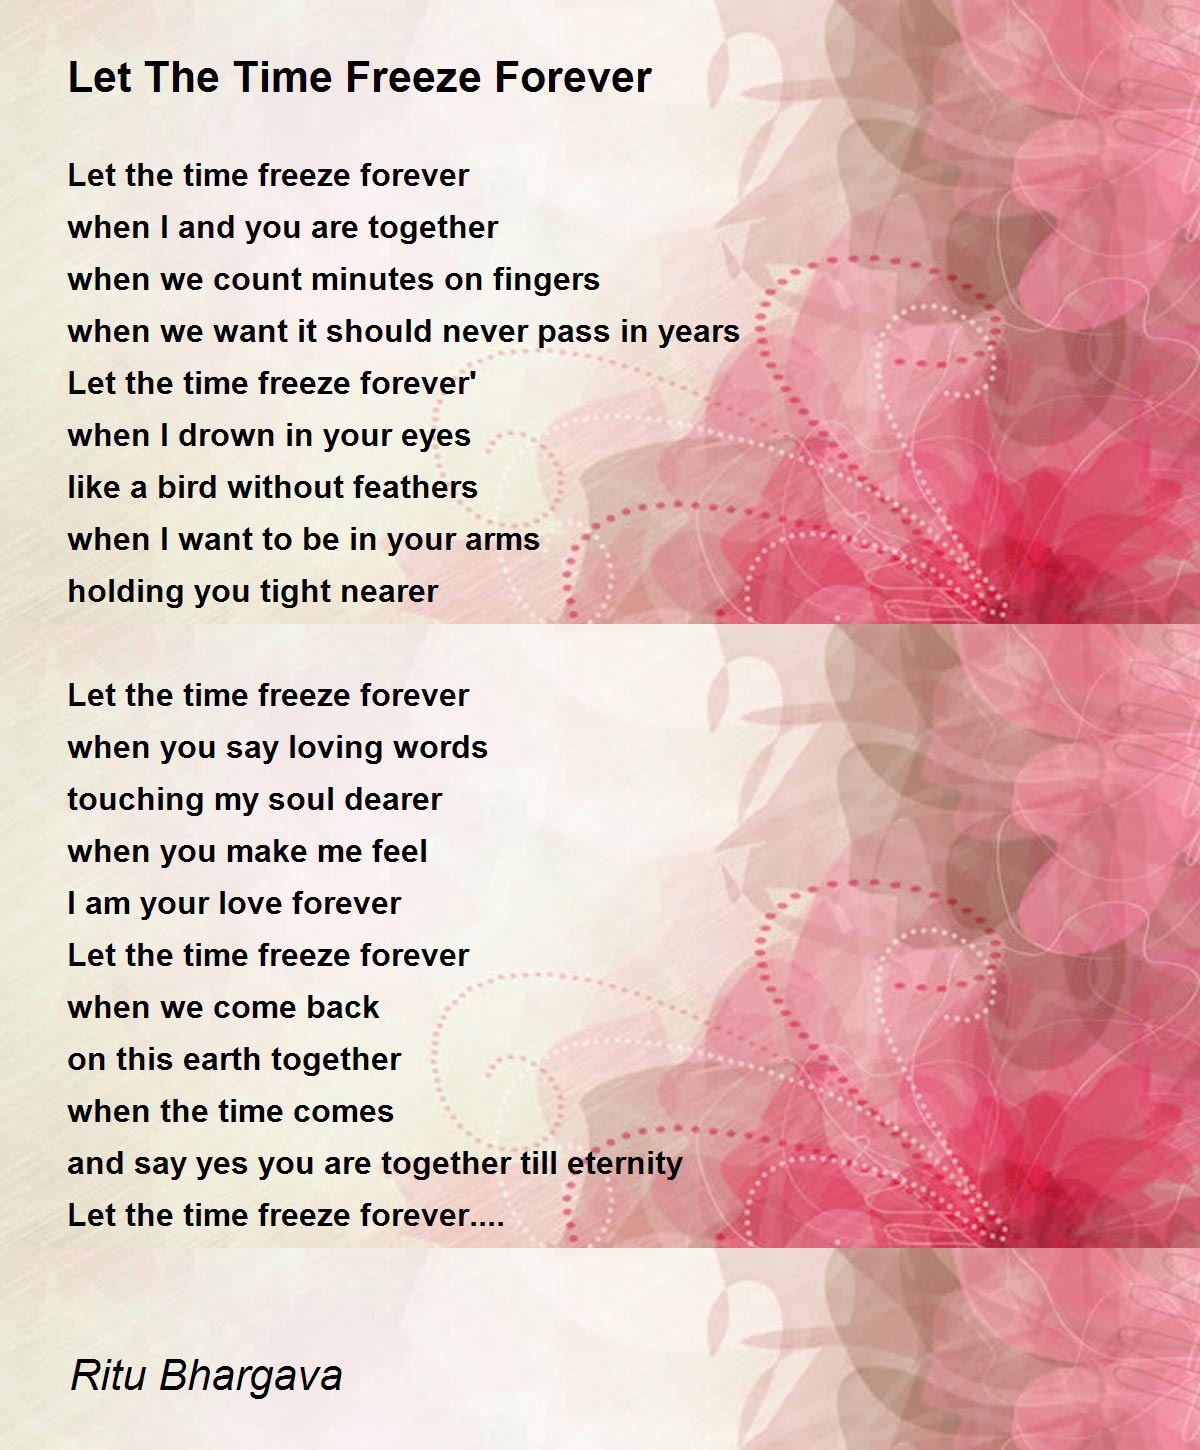 The Time Freeze Forever - Let The Time Forever by Ritu Bhargava